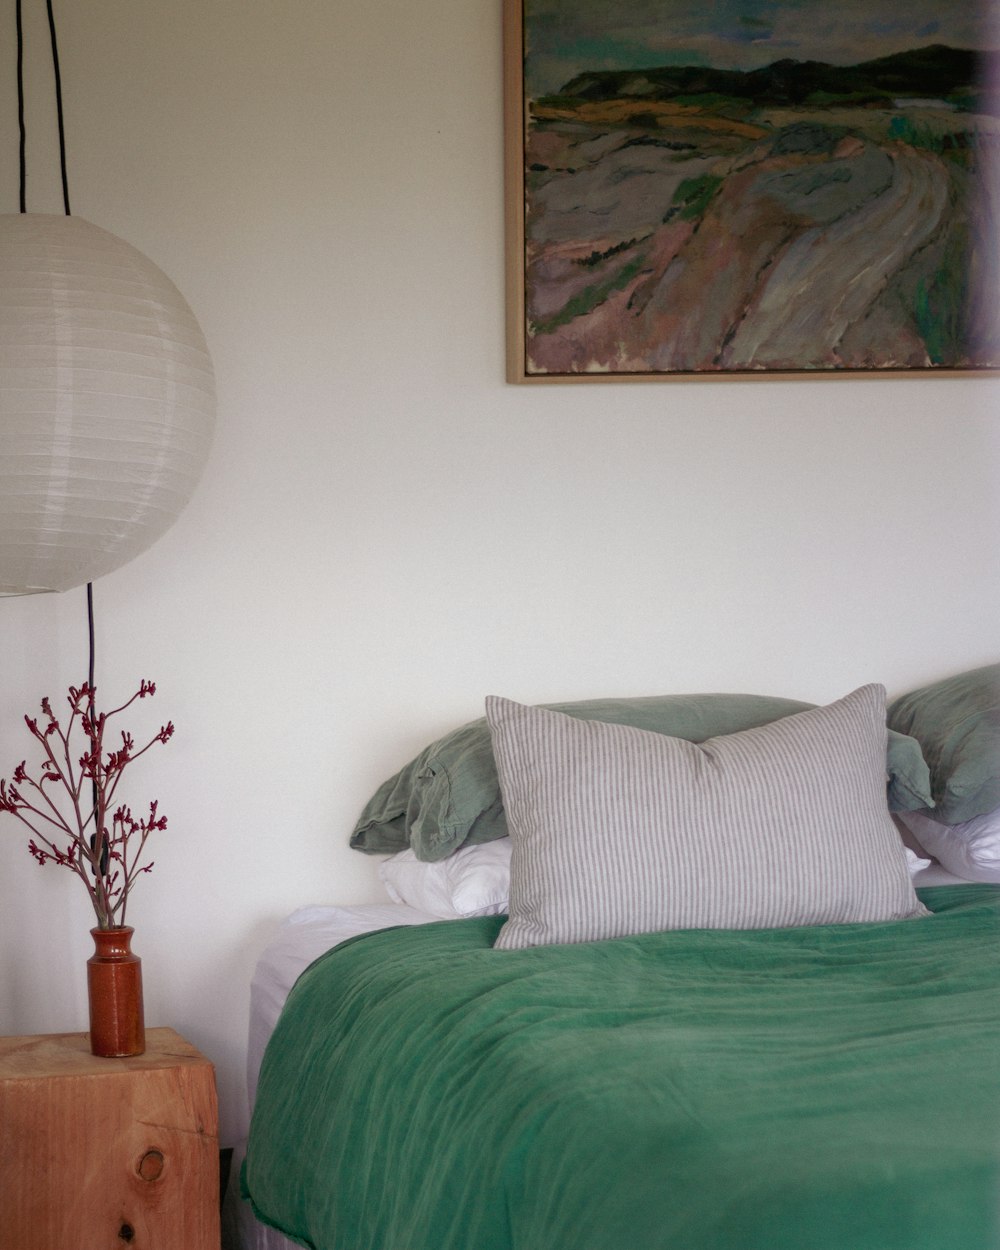 a bed with a green comforter and a painting on the wall